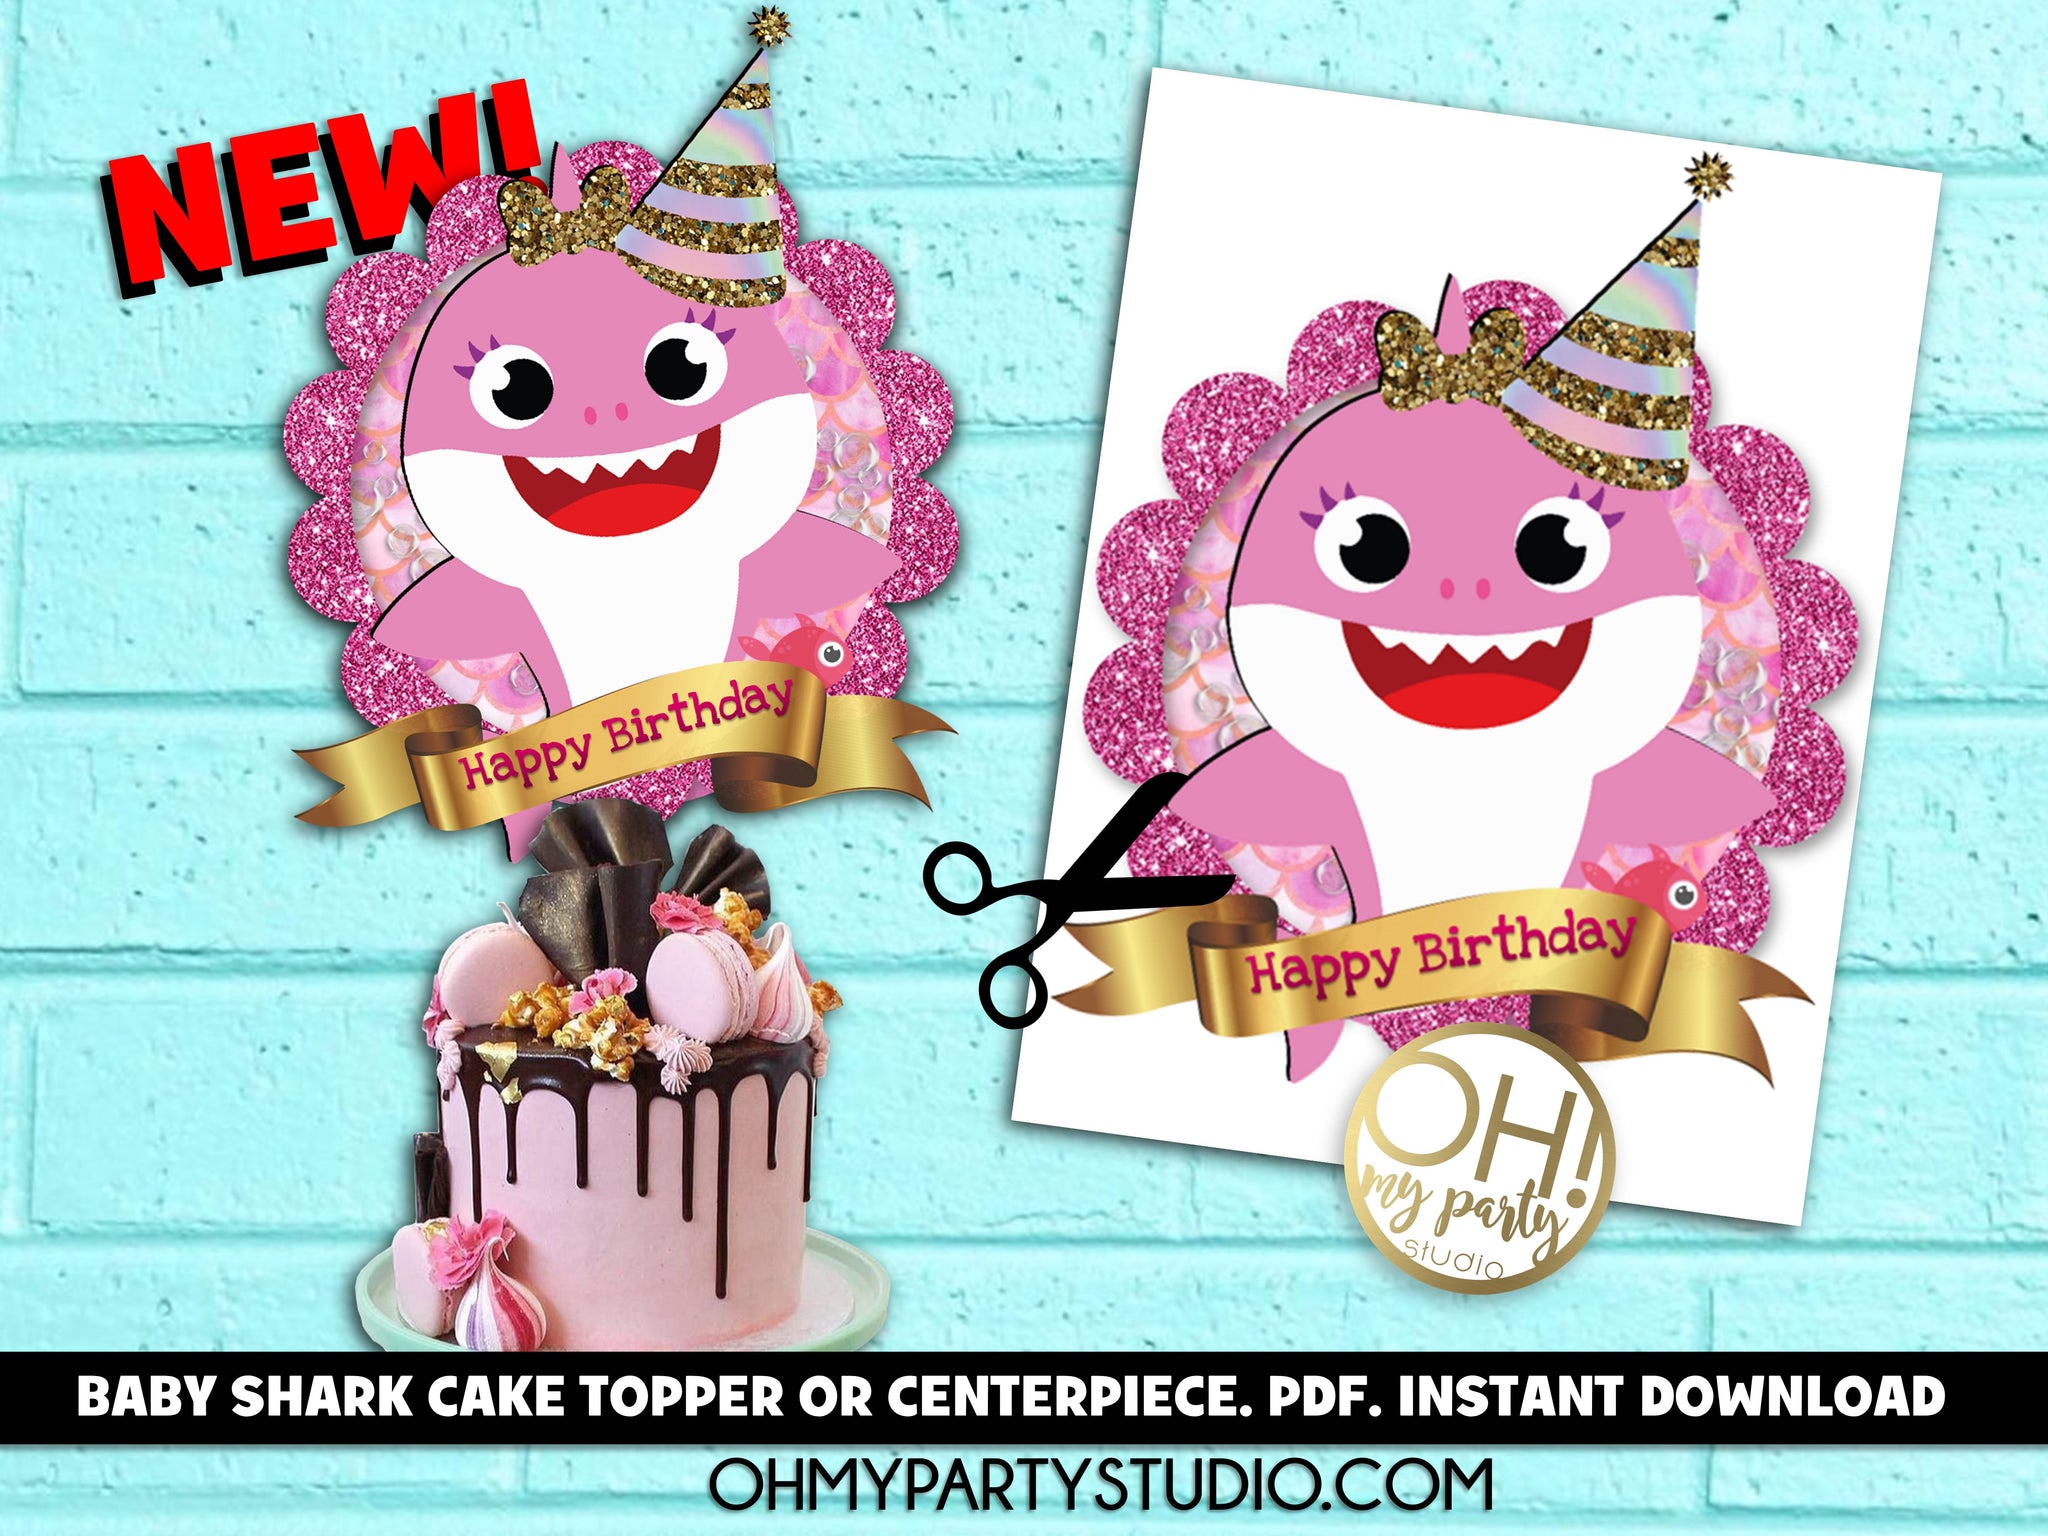 Baby Shark Cake Topper Or Centerpiece Instant Download Oh My Party Studio